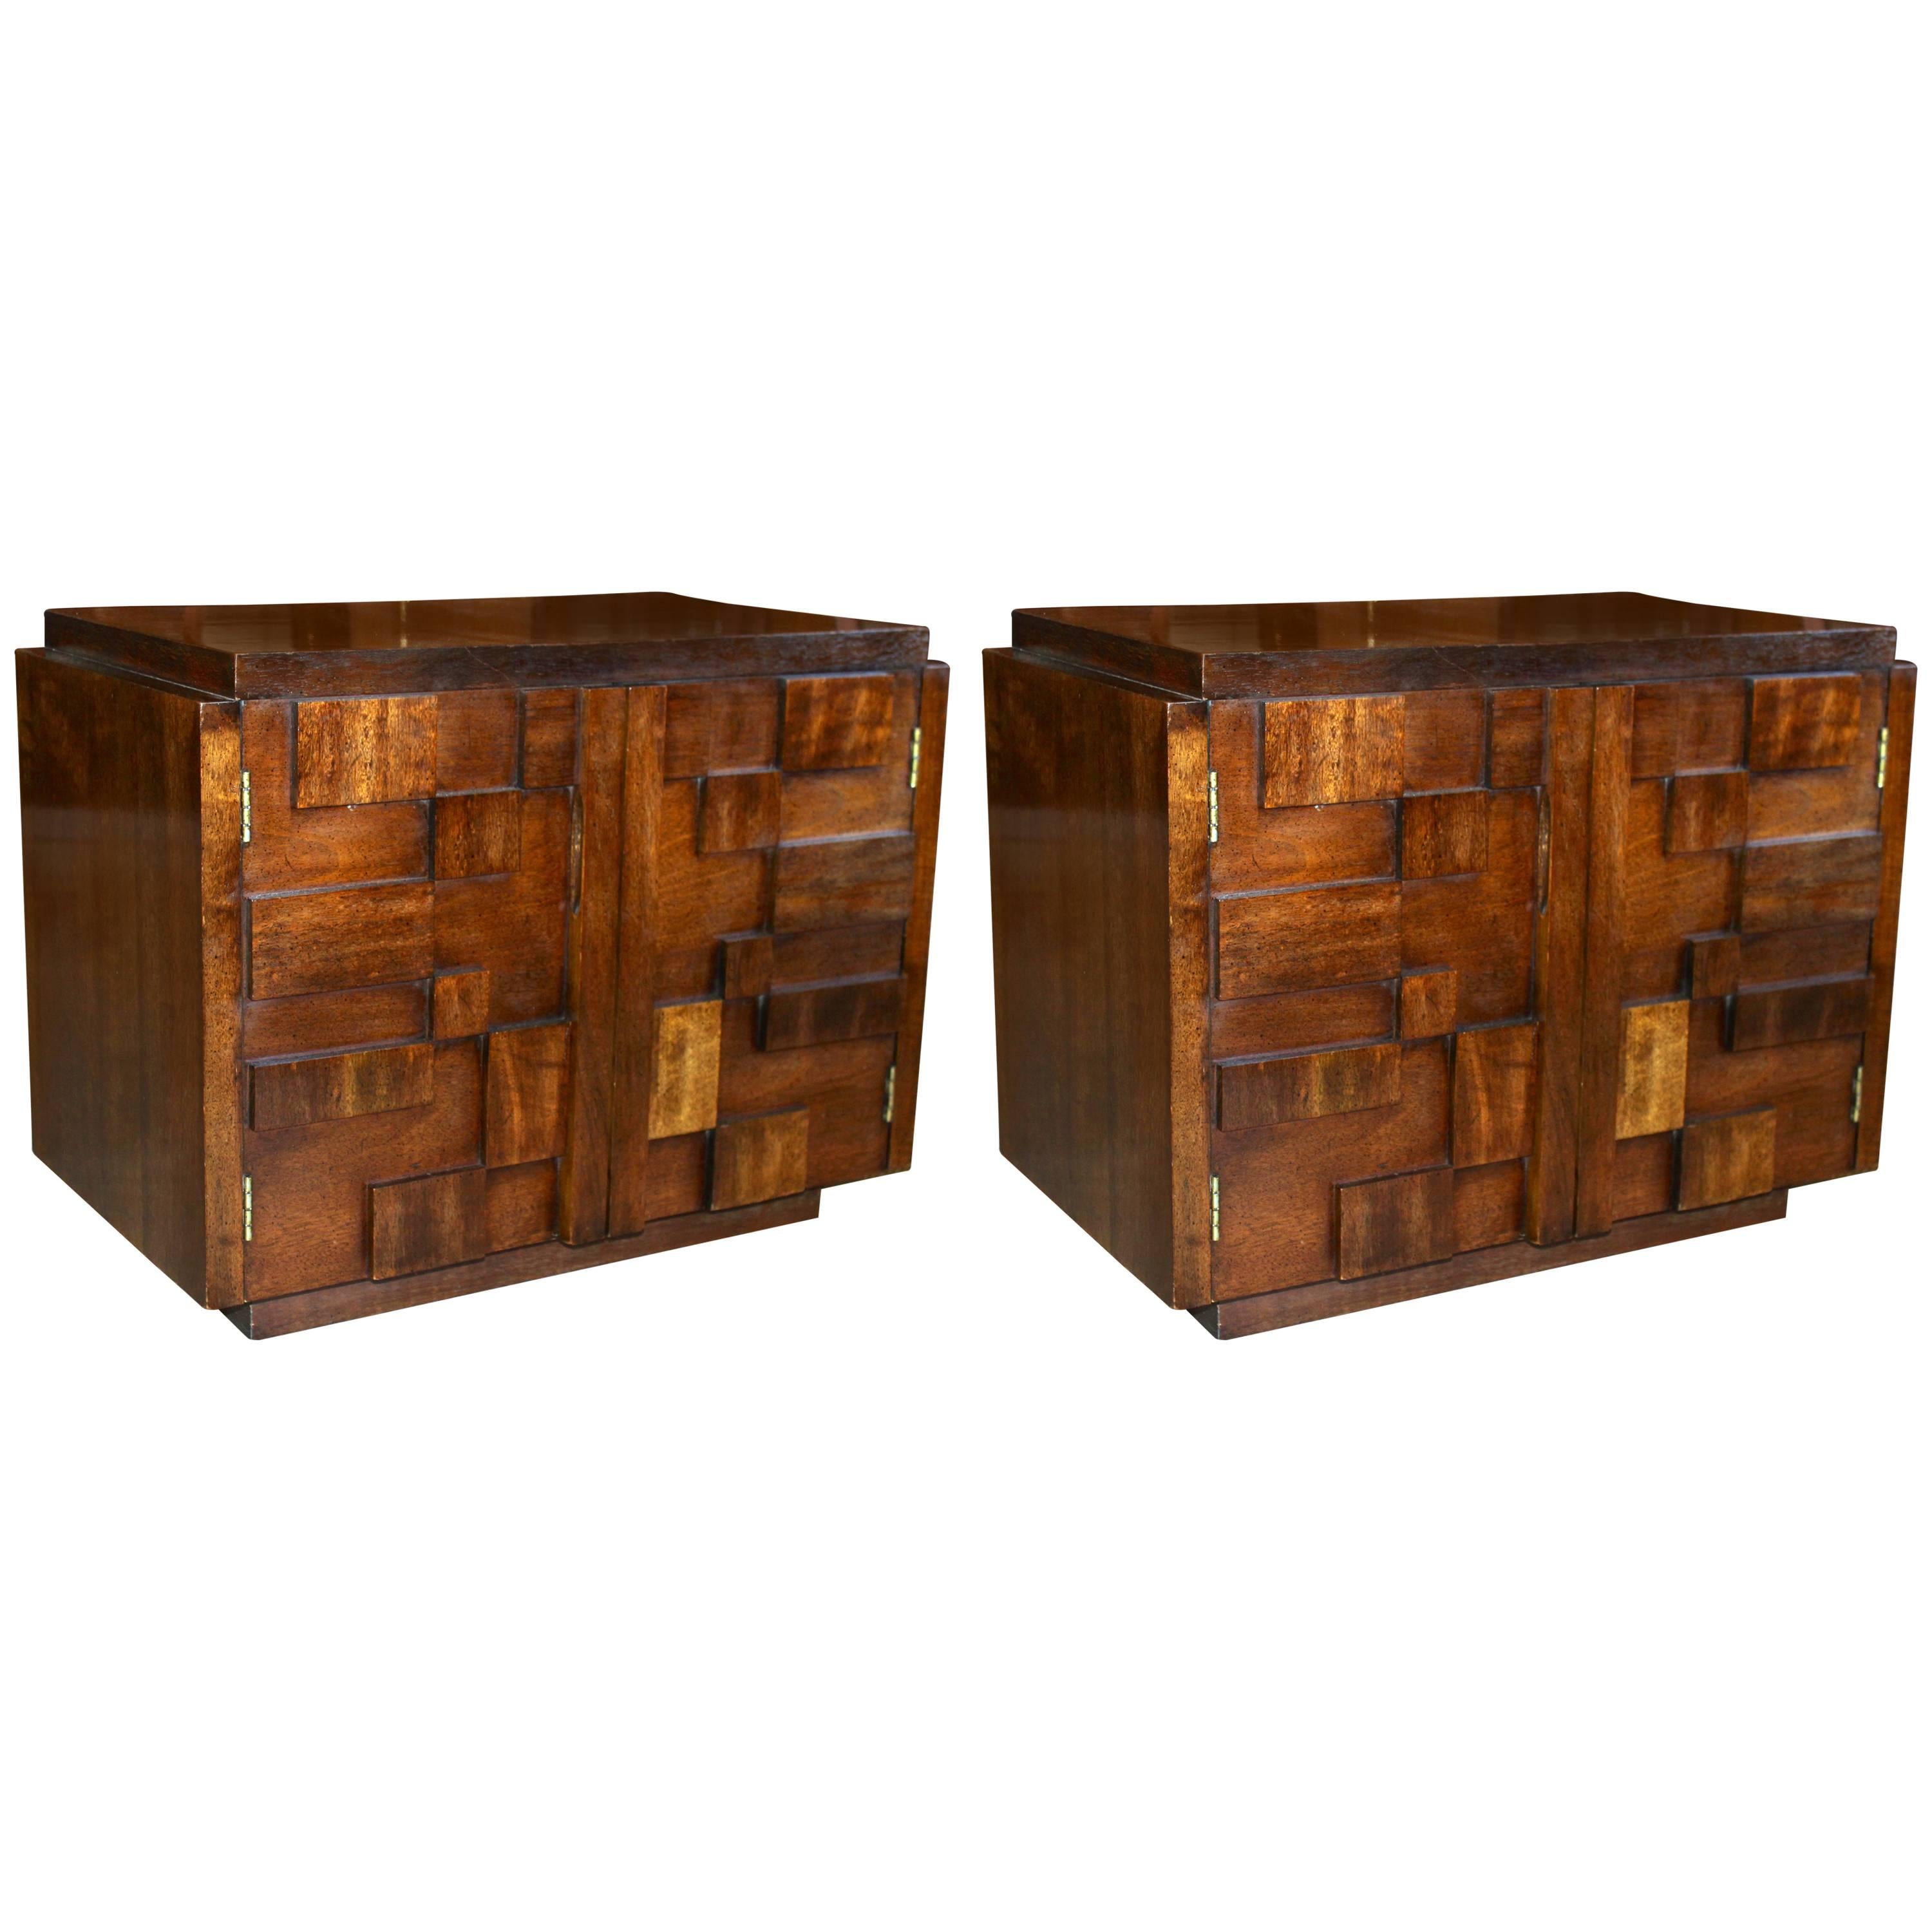 Pair of Lane Brutalist Nightstands, Mosaic Collection